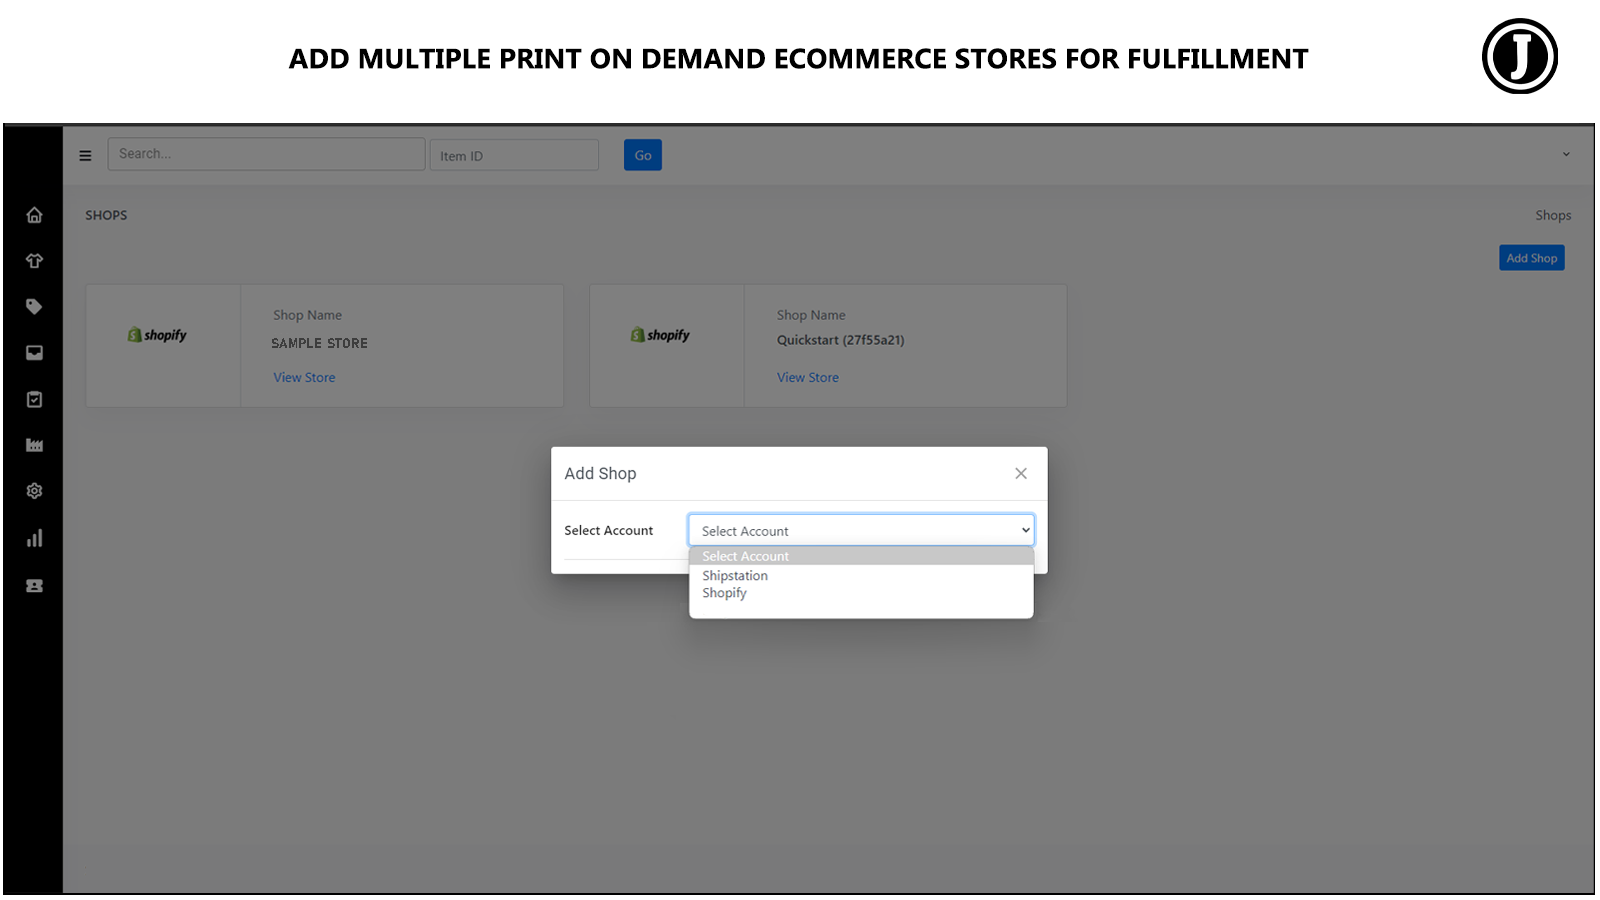 Add multiple stores for fulfillment